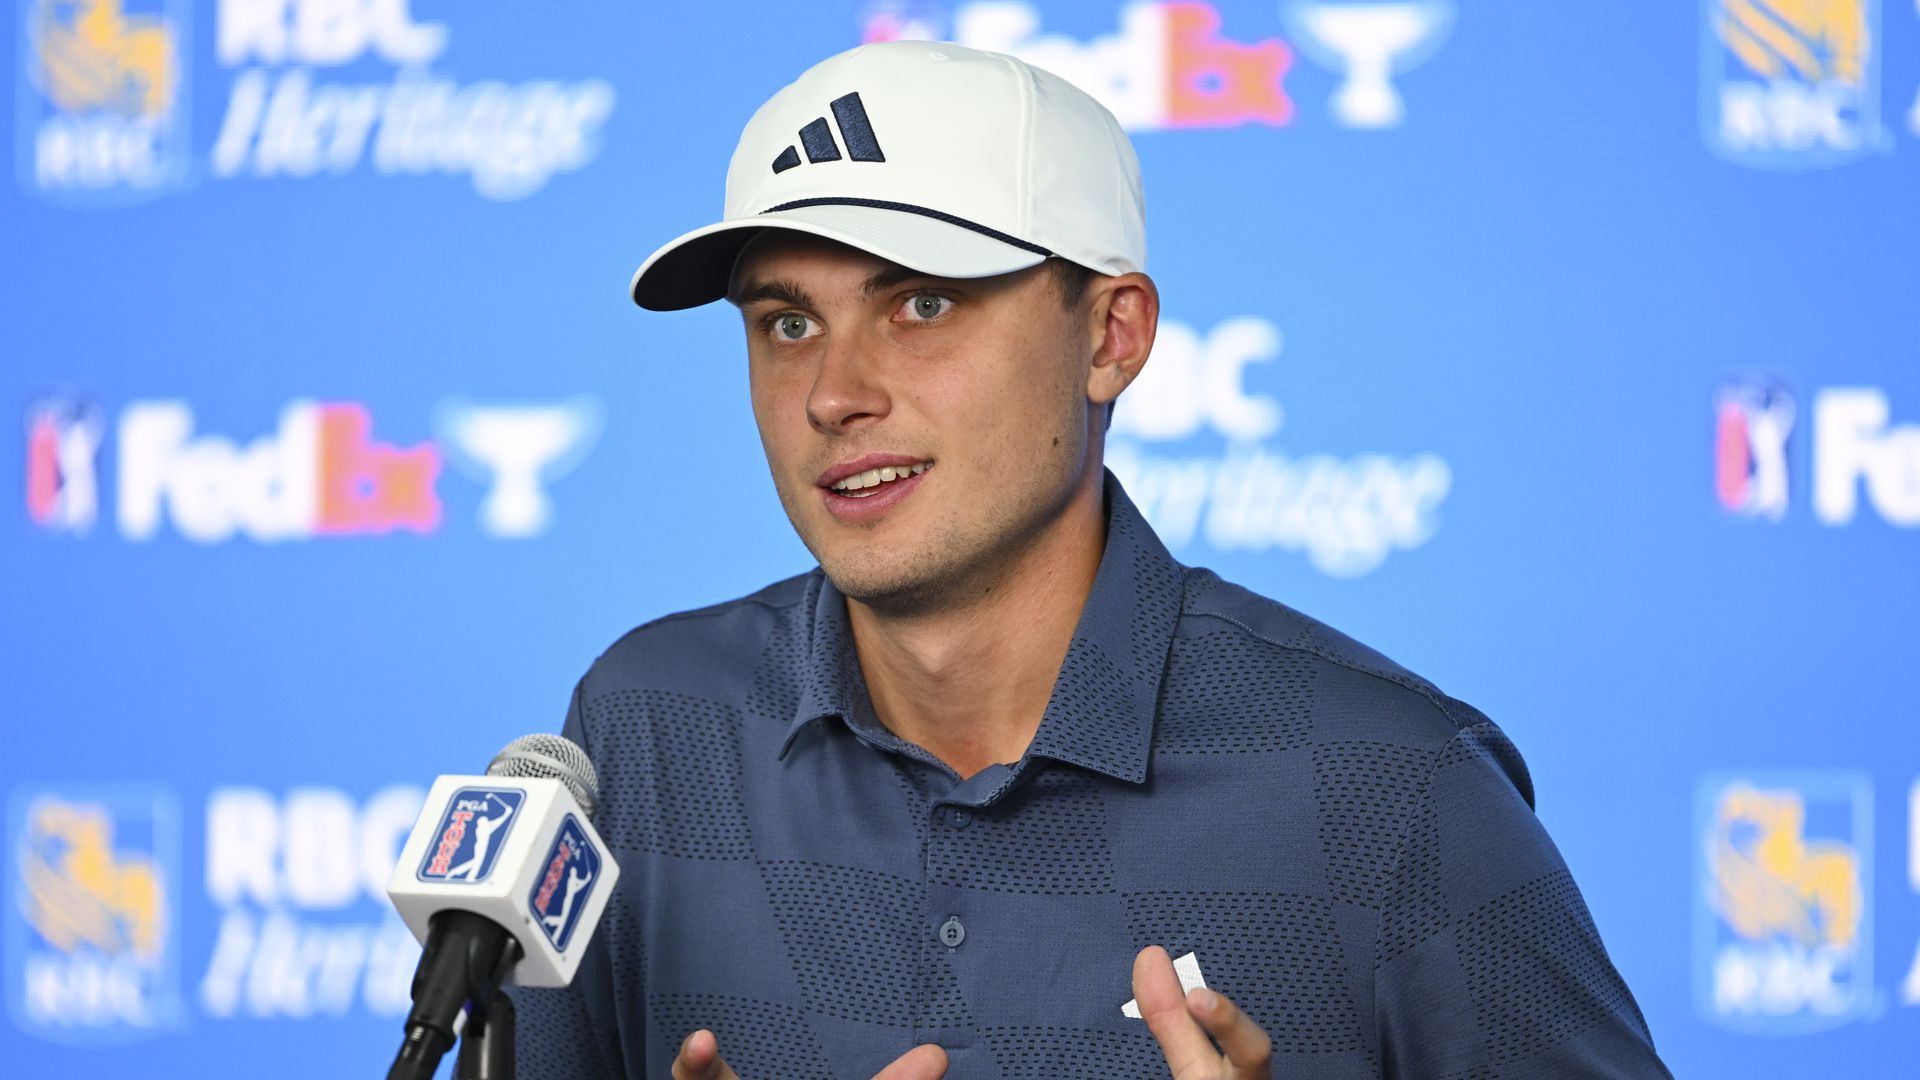 rbc heritage: ludvig aberg recounts “dumb mistake” that cost him the masters